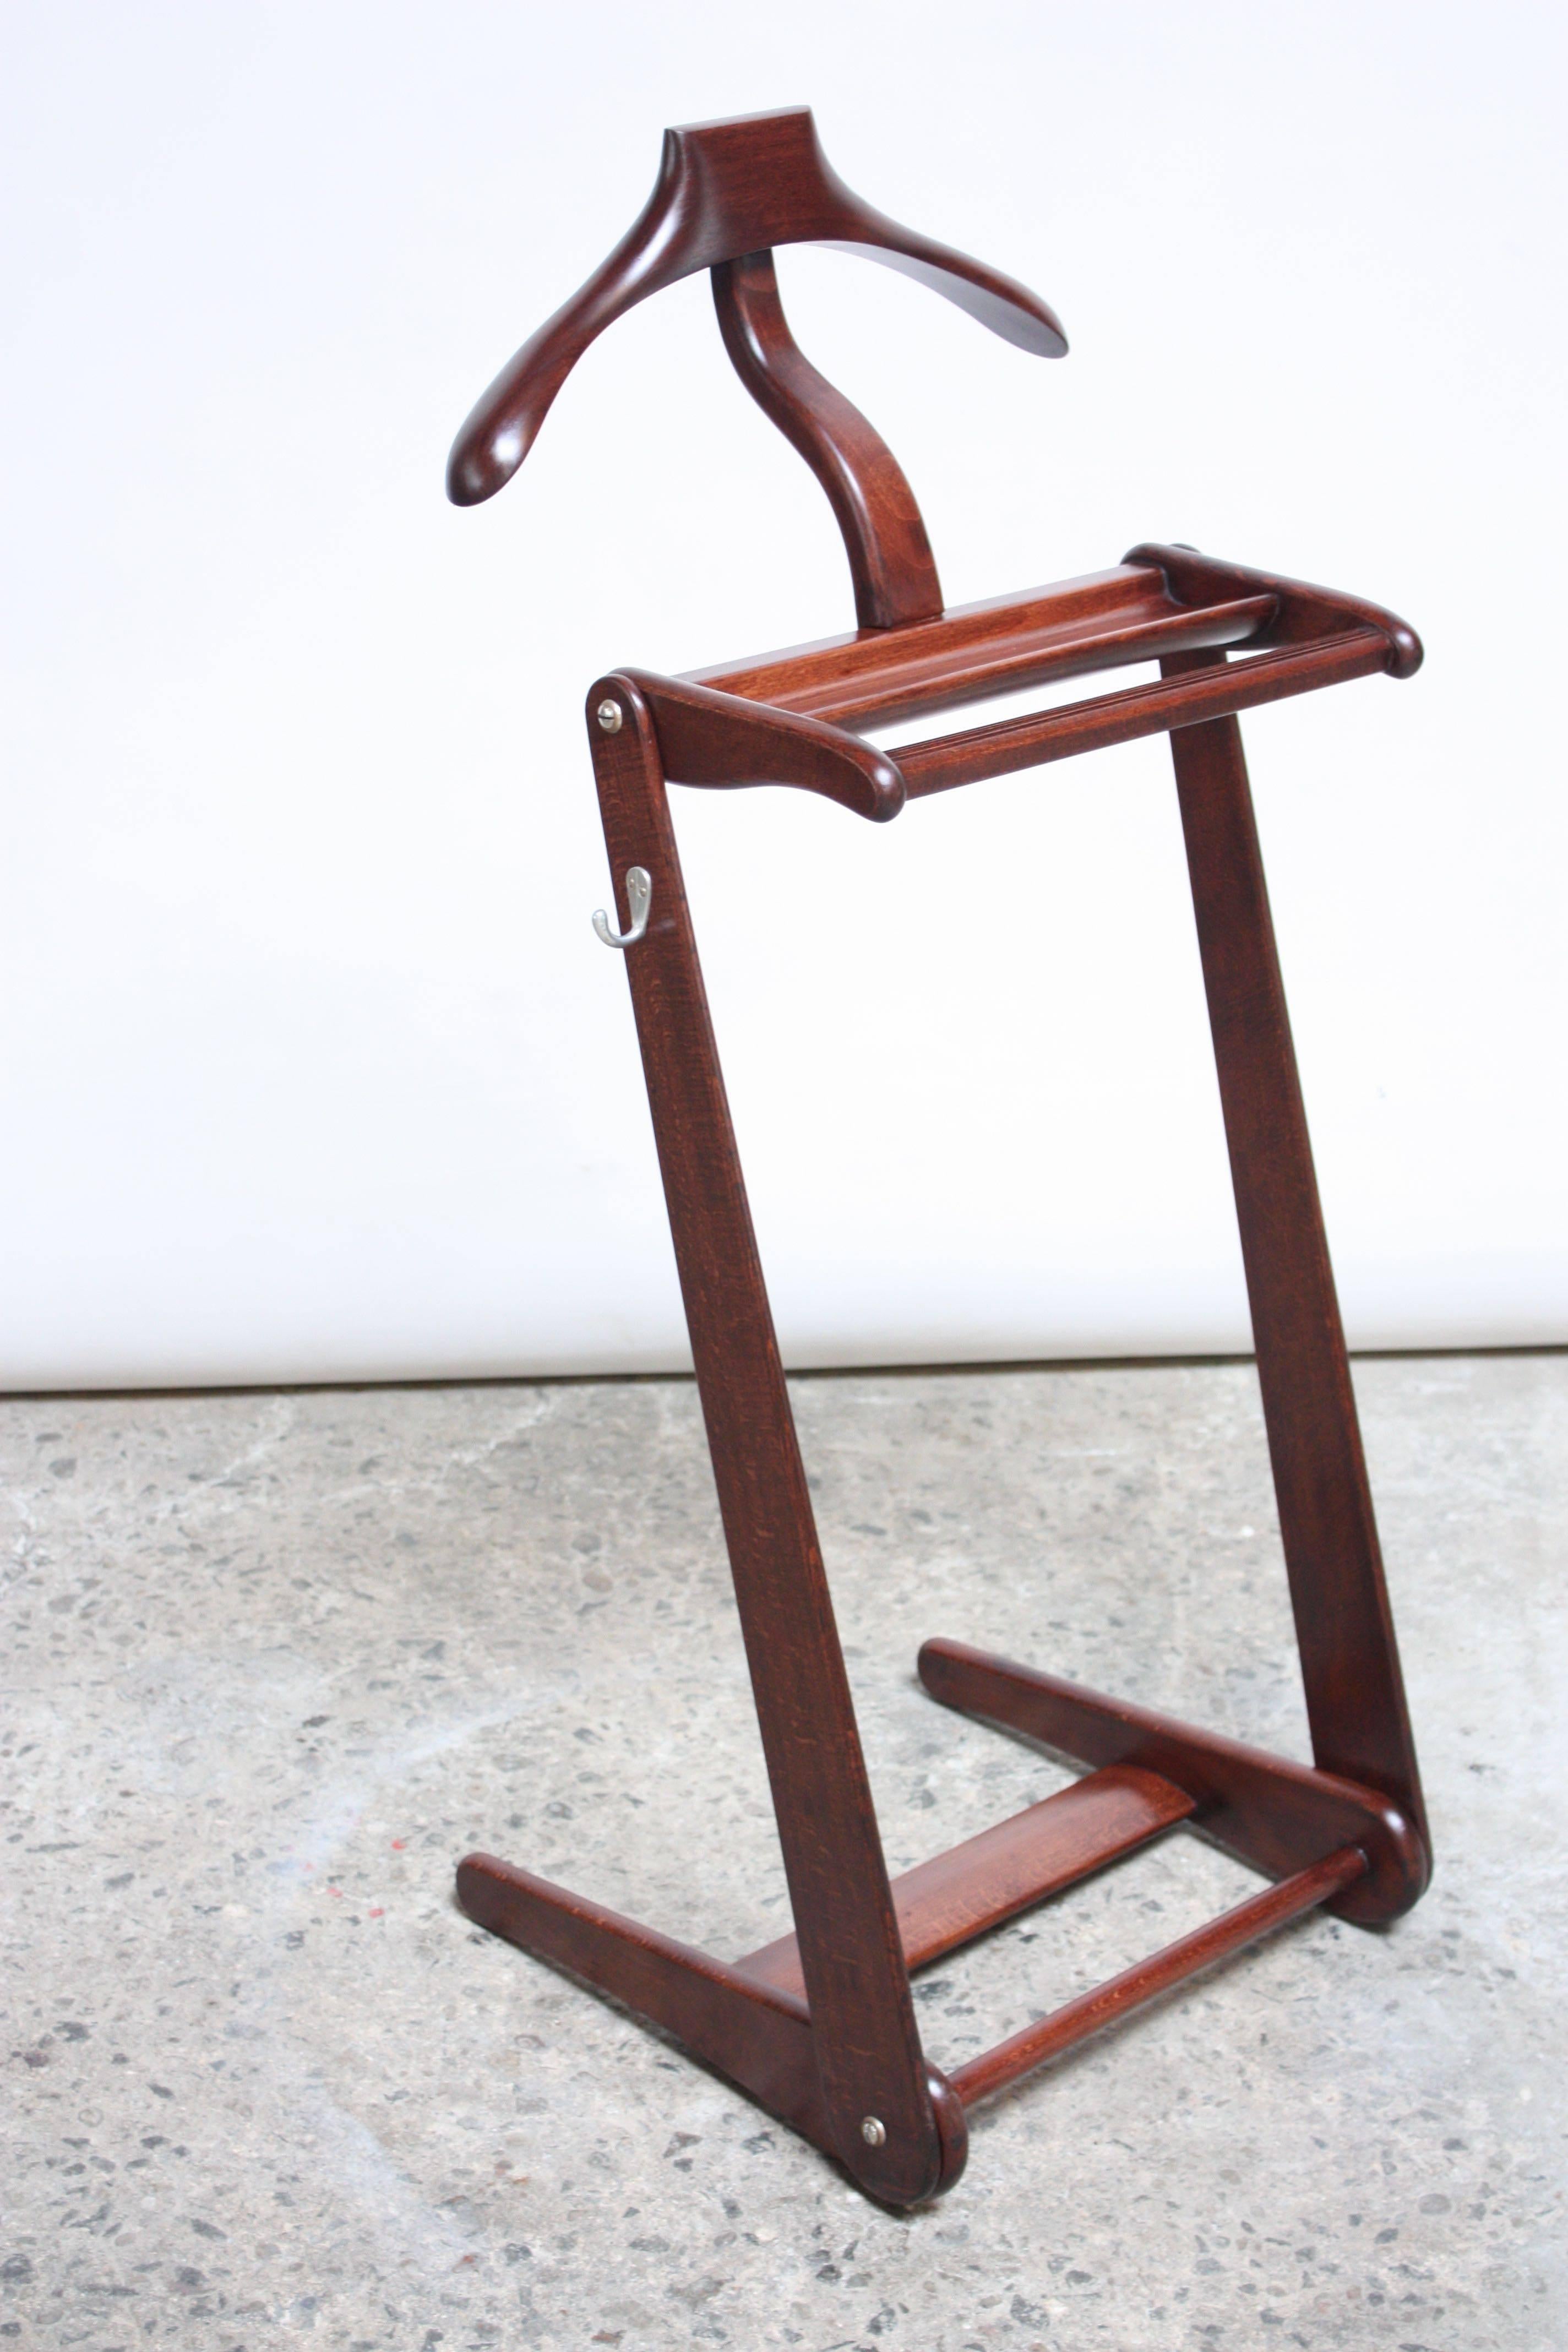 Handsome, sculptural-form mahogany valet with a hanger, double rack on the bottom for shoes, top bar for hanging scarves, ties or pants and an additional aluminium hook on the side. Branded 'Made in Belgium' to the underside, and embossed NYC